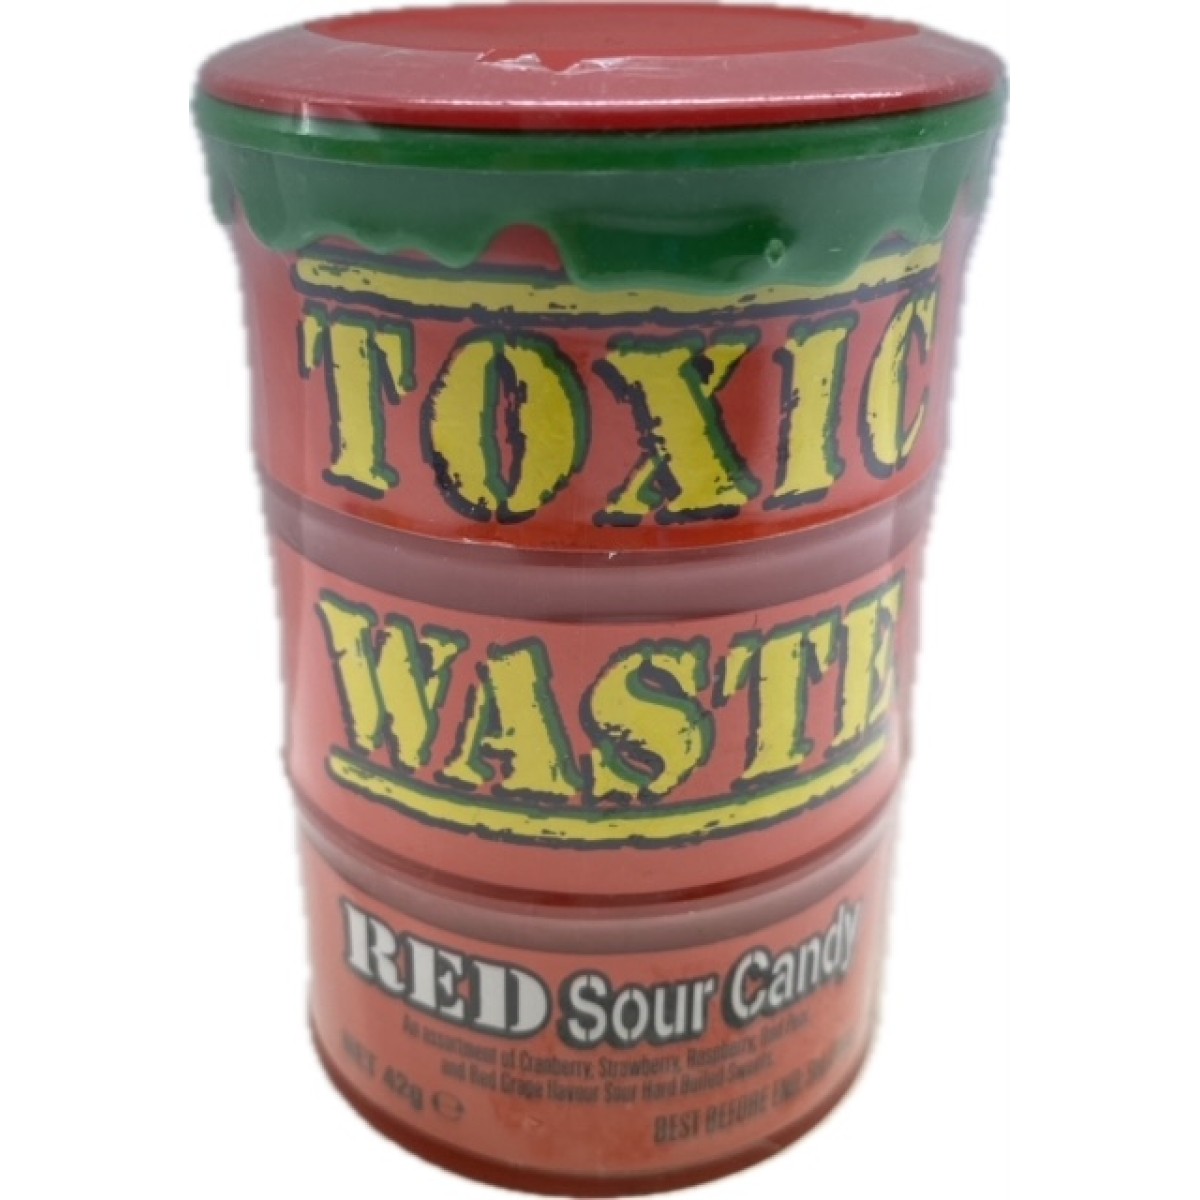 Toxic waste red sour candy